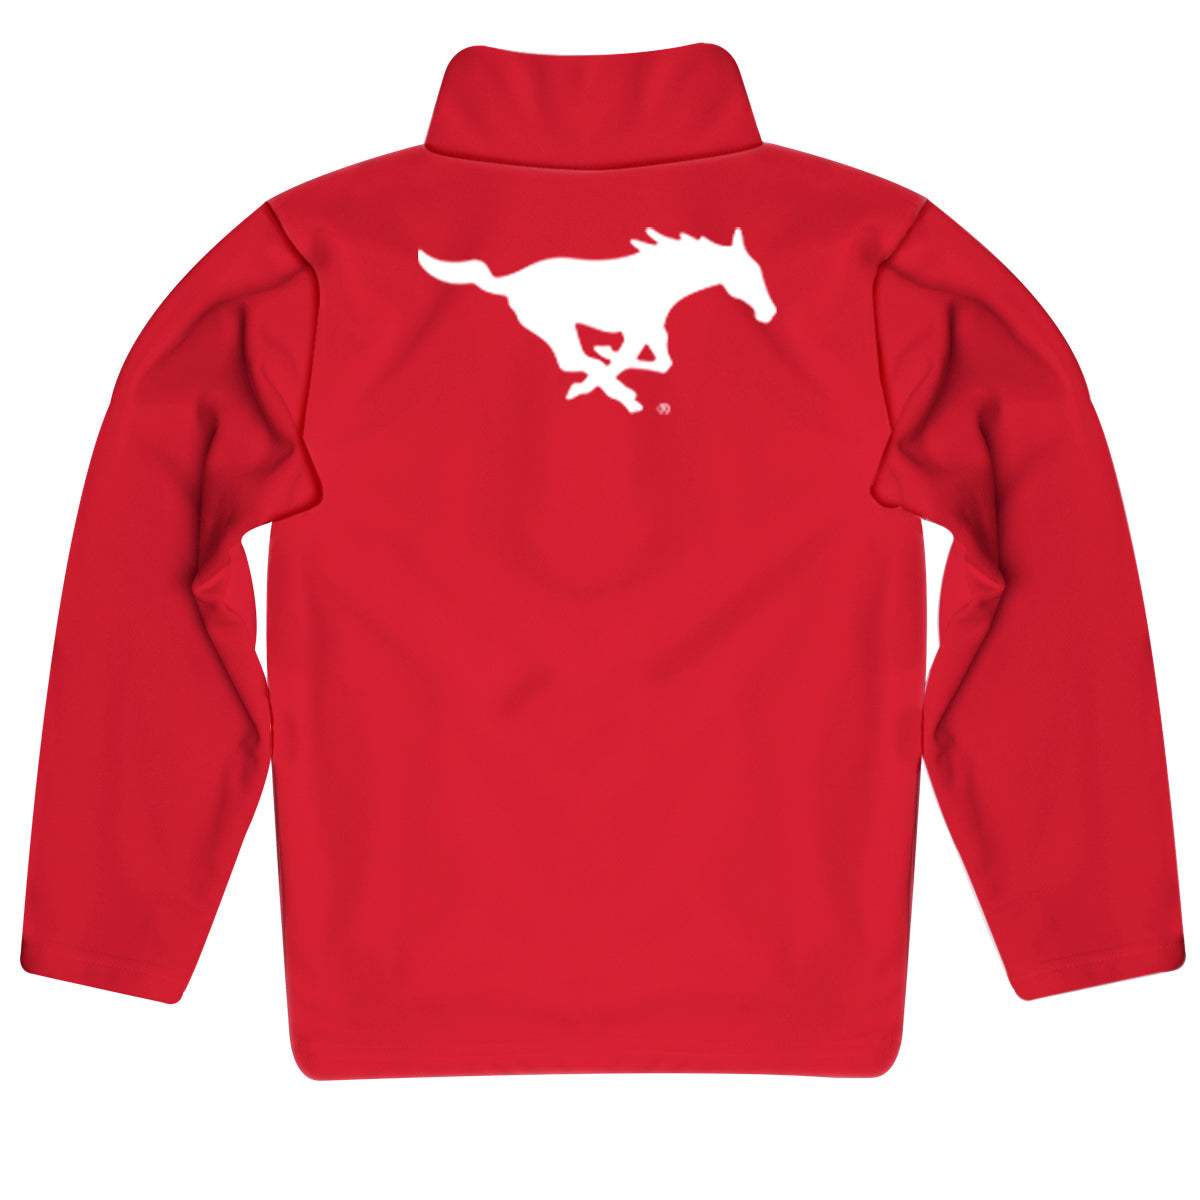 Southern Methodist Mustangs  Game Day Solid Red Quarter Zip Pullover for Infants Toddlers by Vive La Fete